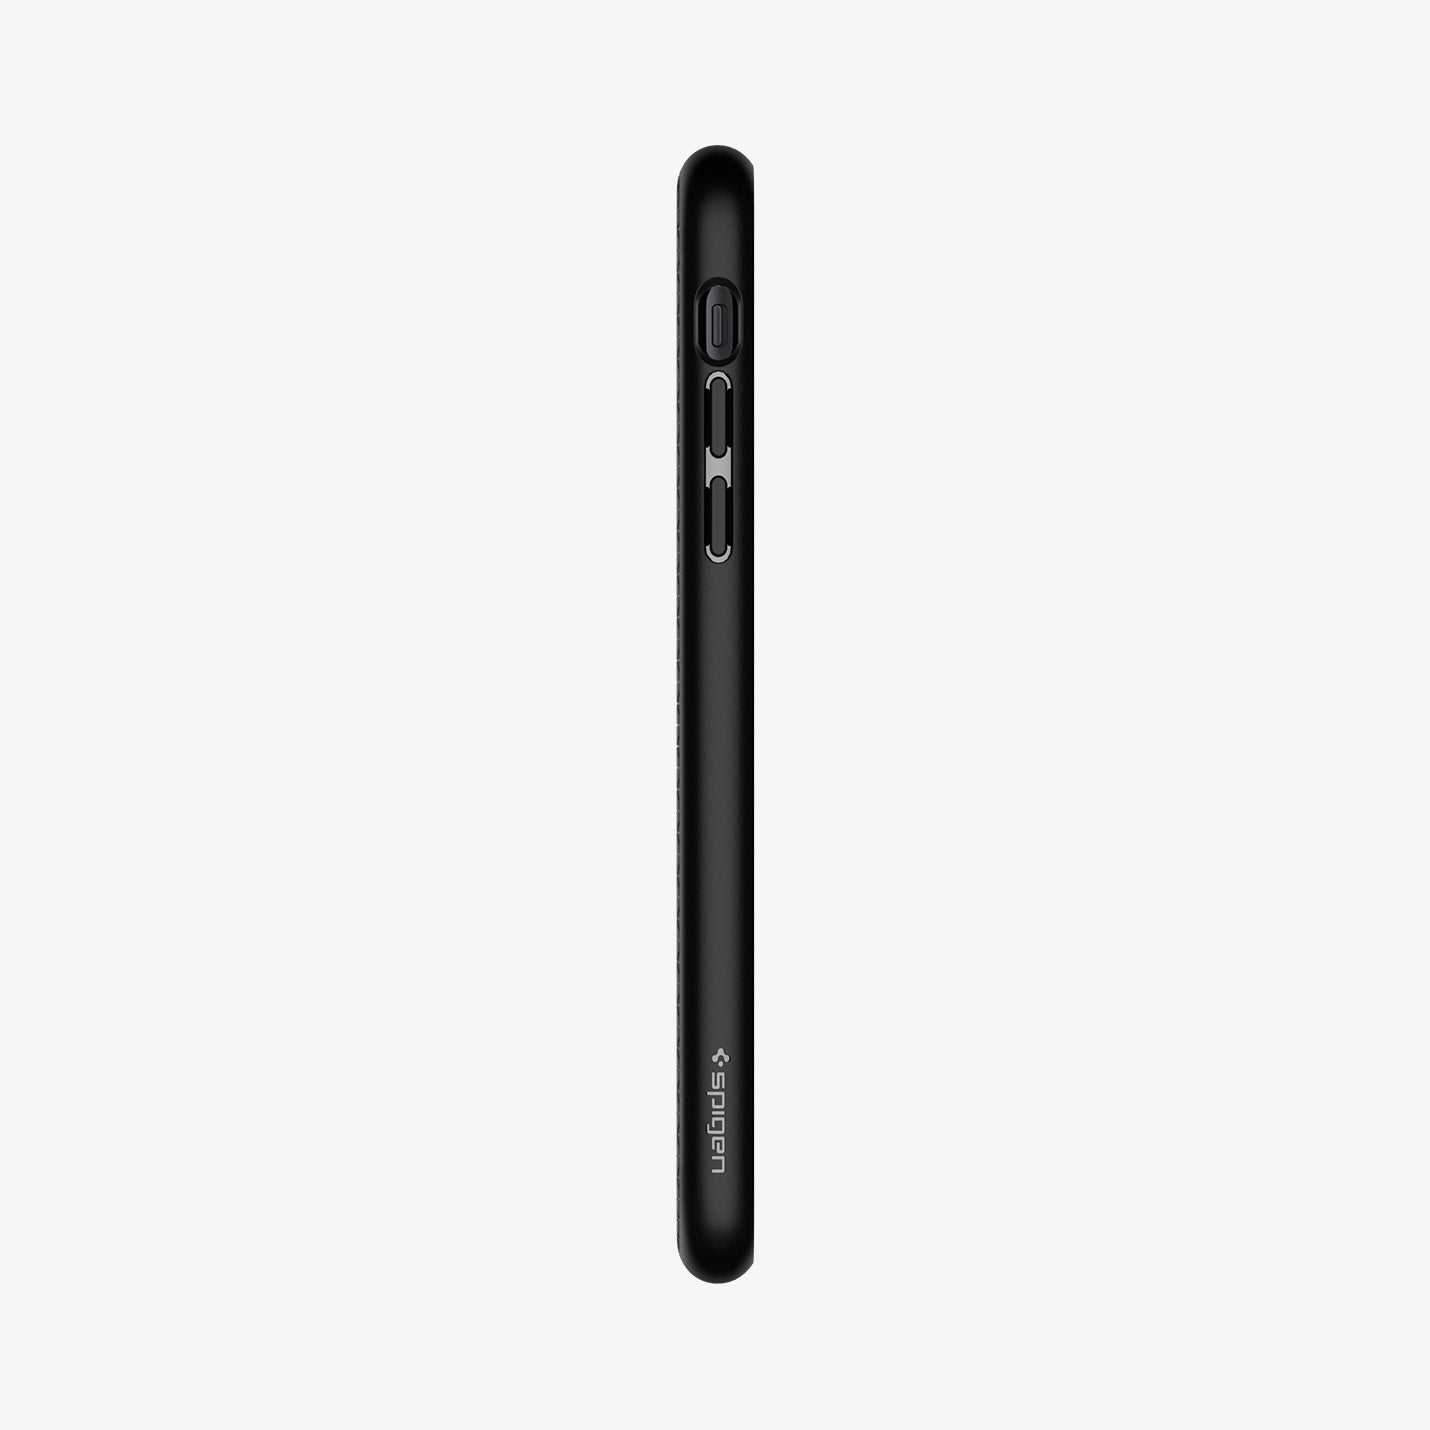 064CS24872 - iPhone XR Case Liquid Air in Black showing the side with side buttons